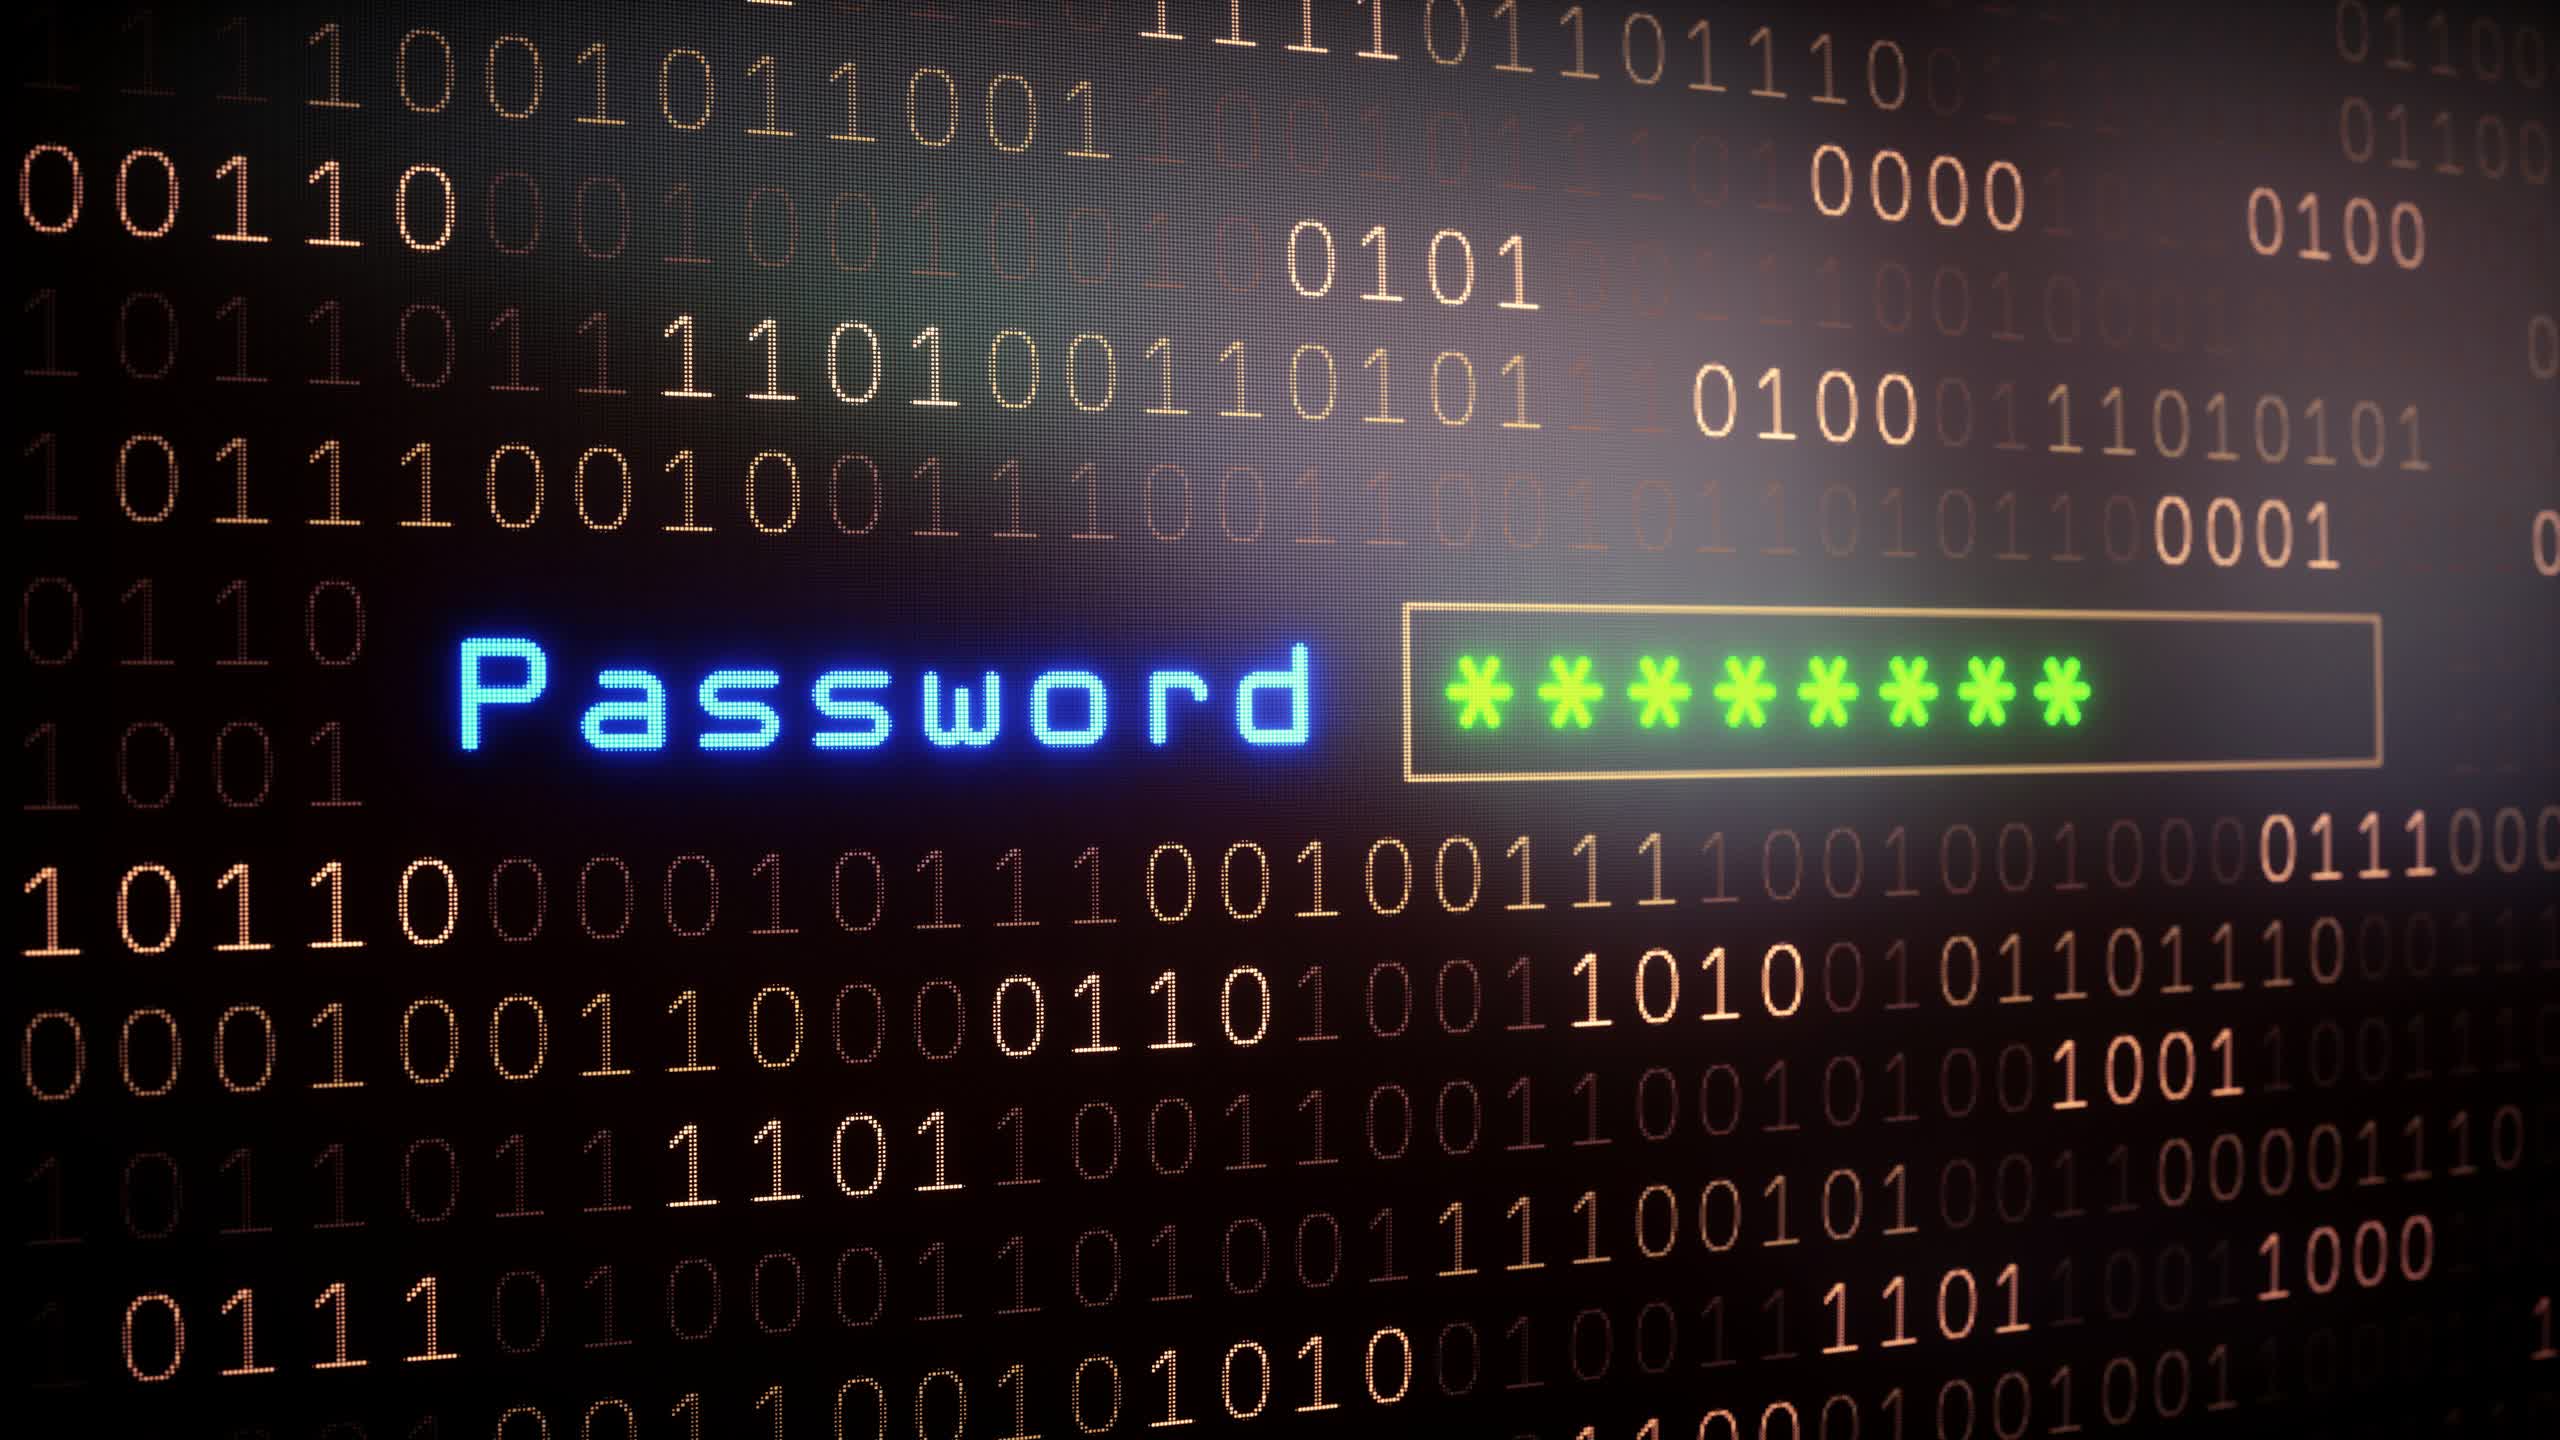 The US Department of the Interior has a significant password issue